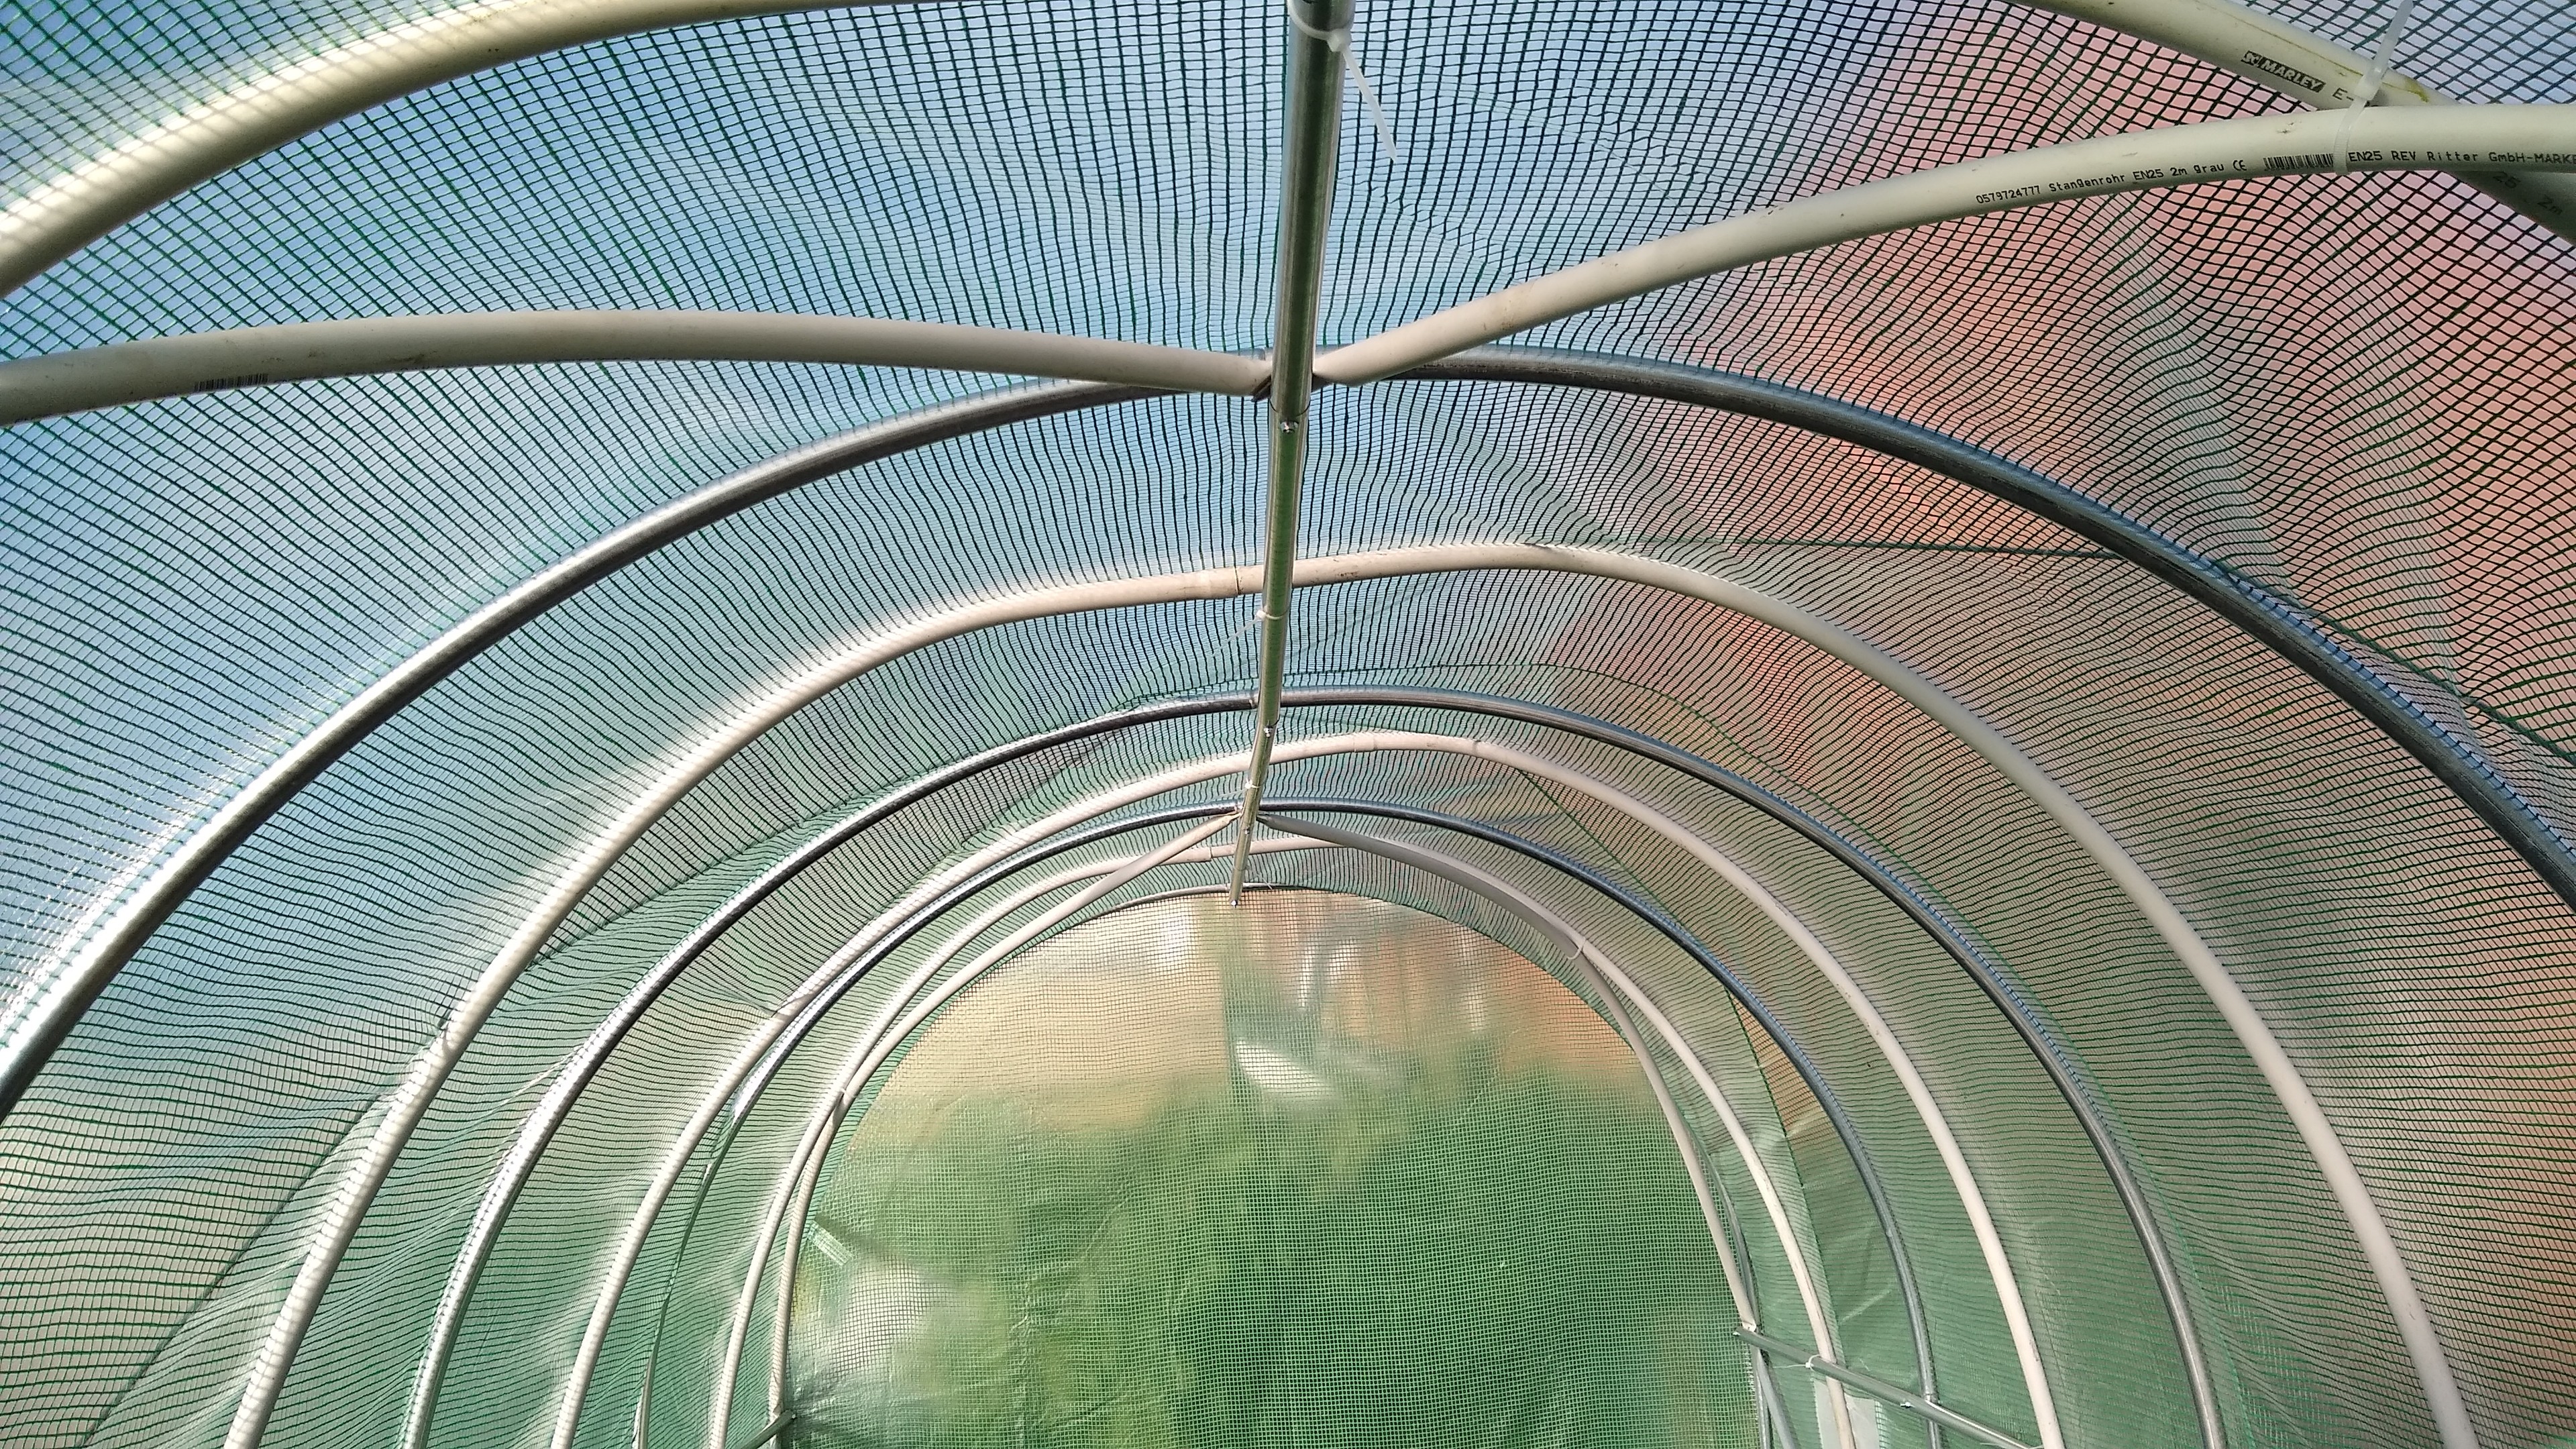 metal construction of polytunnel re-enforced with additional plastic and metal pipes